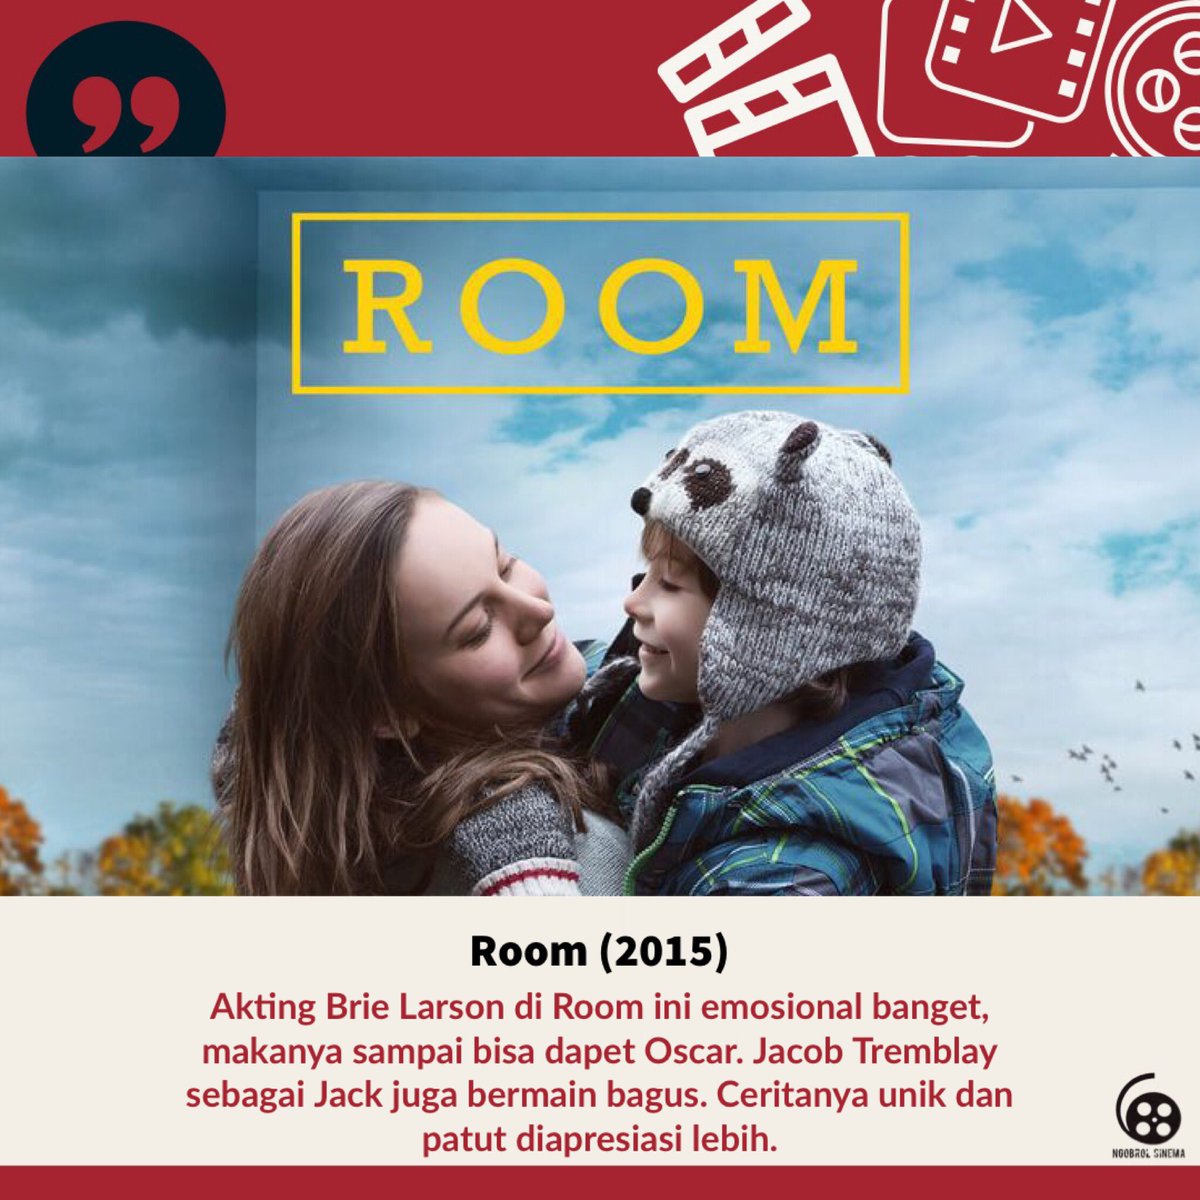 The room poster. Бри Ларсон Room 2015. Комната 2015.